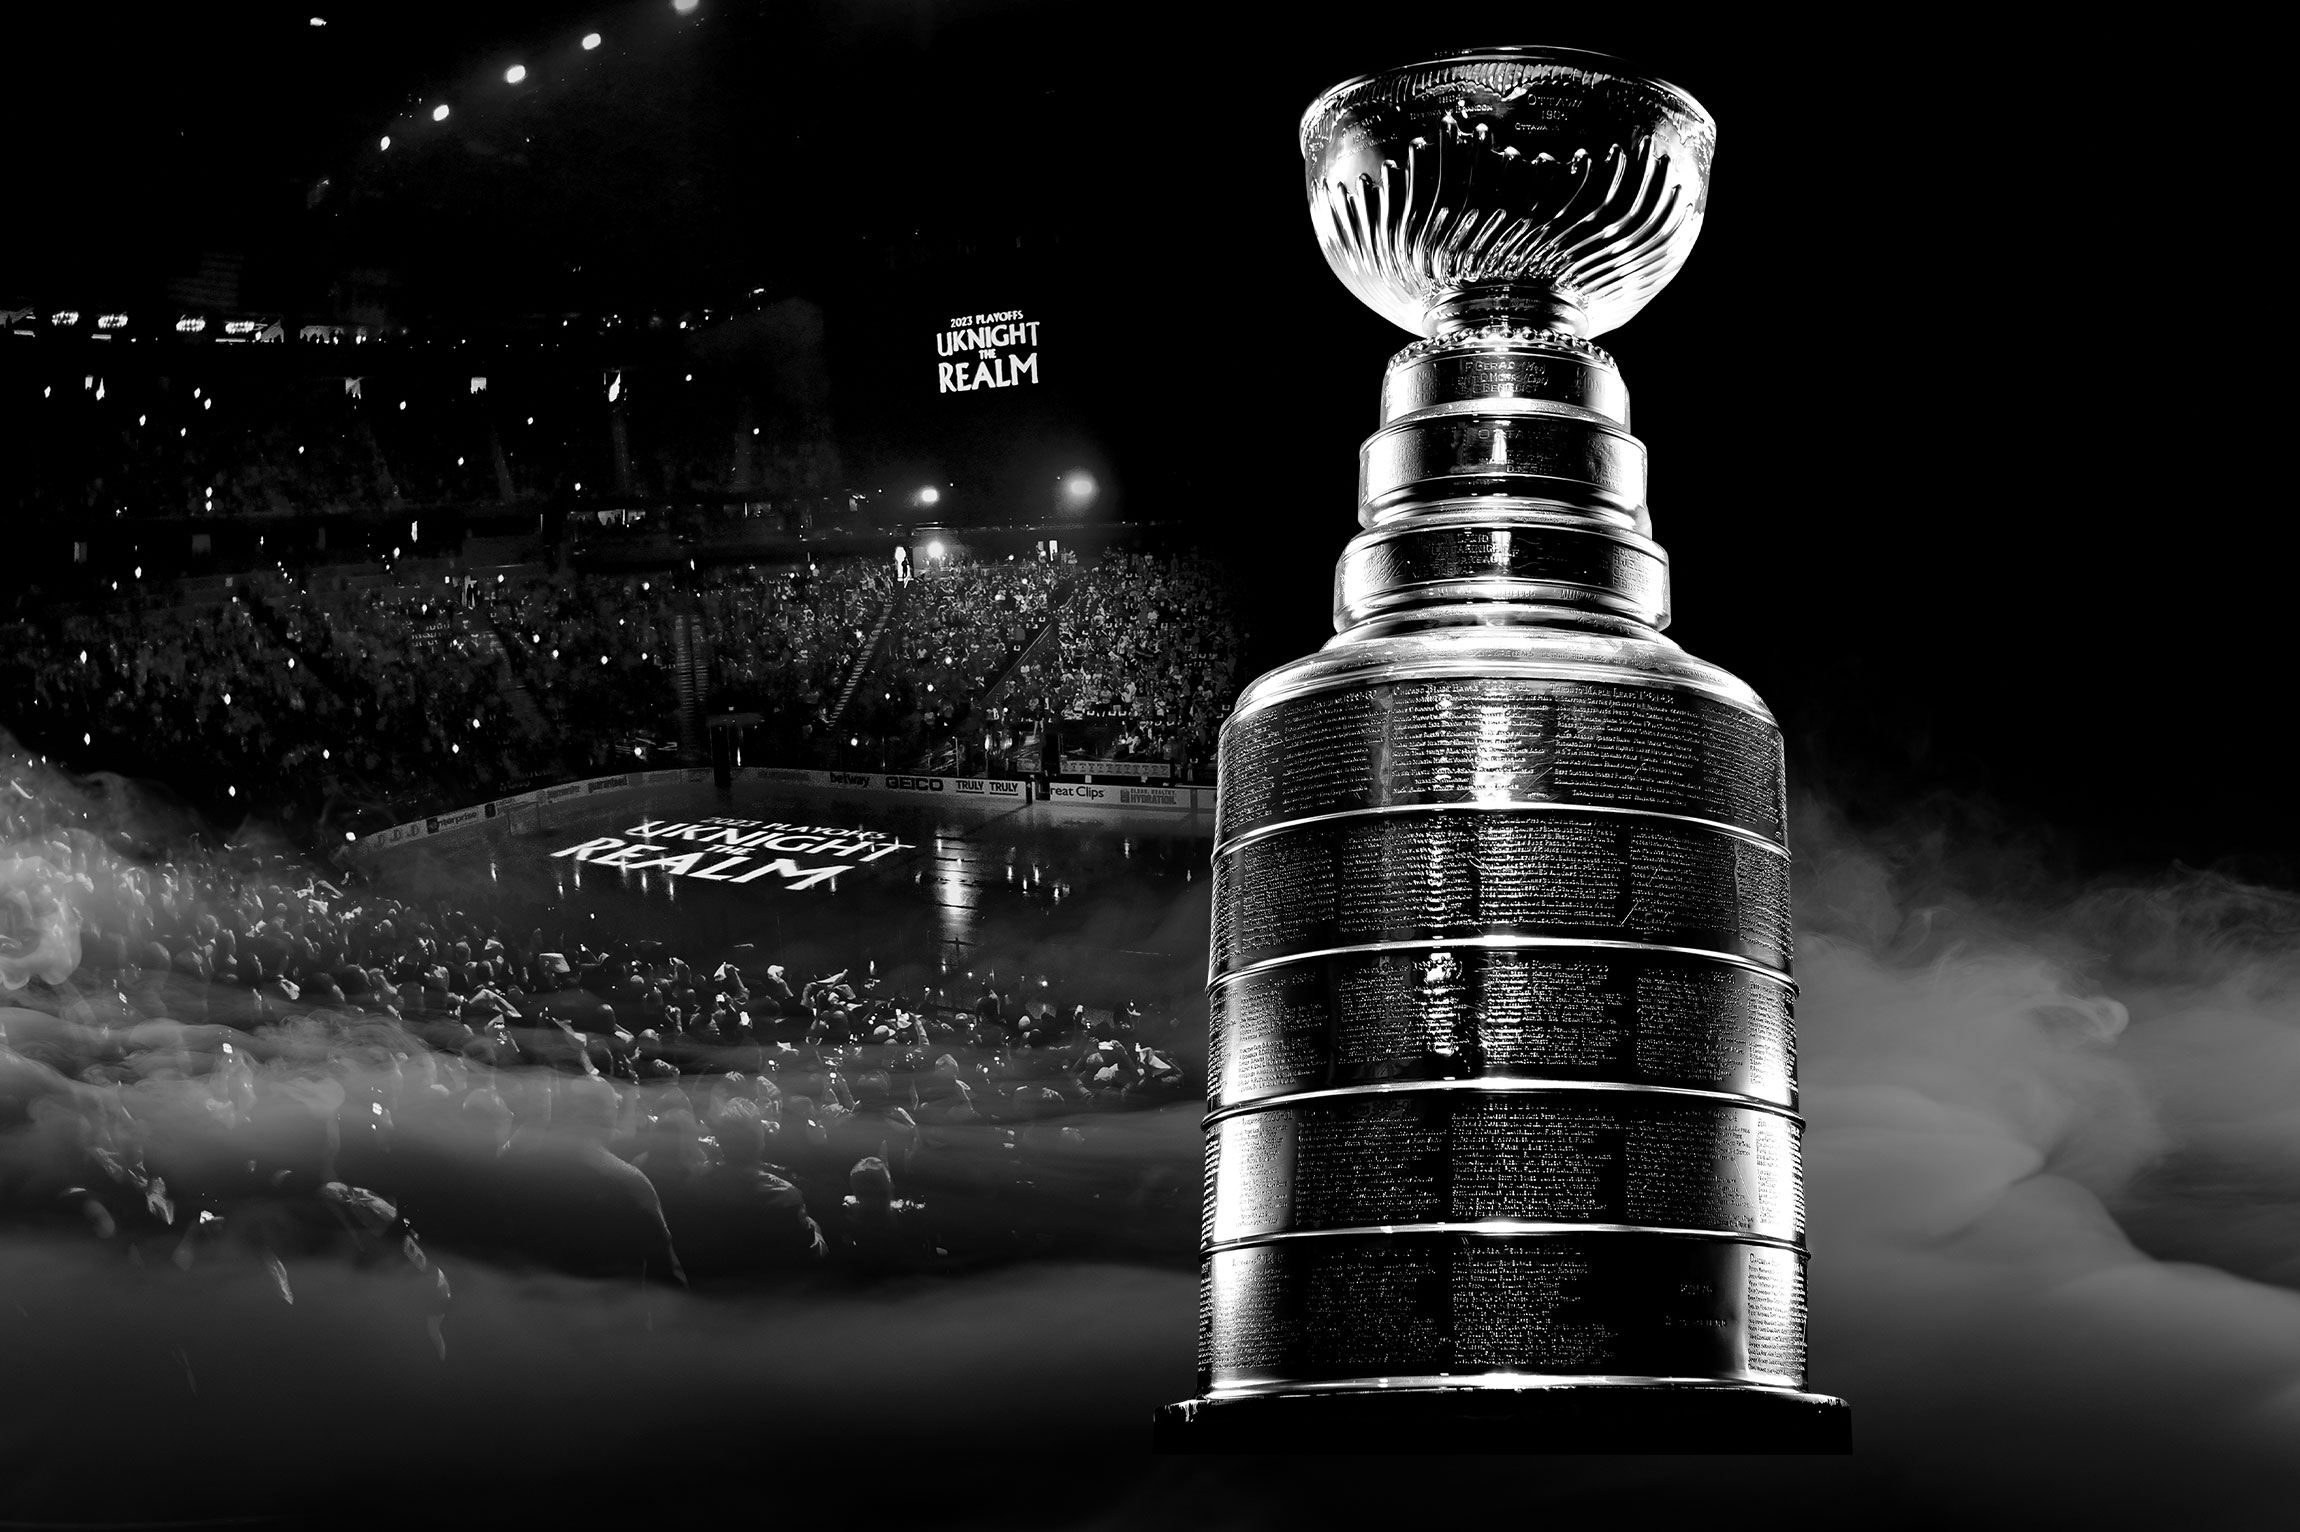 Get to know the Stanley Cup, the coveted NHL trophy captured by the